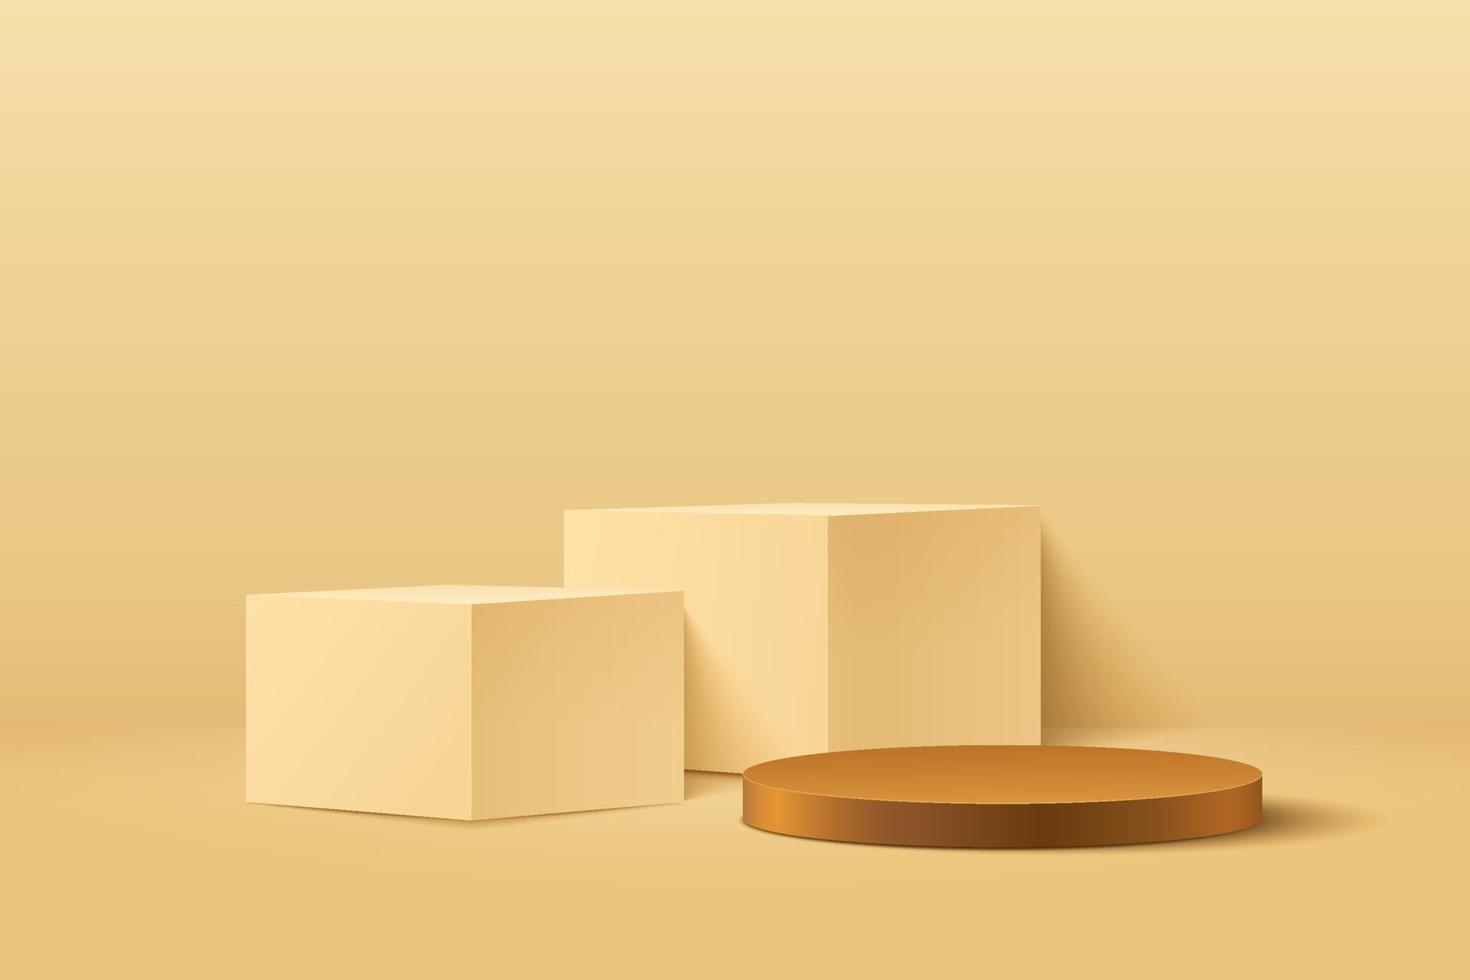 Abstract cube and round display for product on website in modern design. Background rendering with podium and minimal gold texture wall scene, 3d rendering geometric shape yellow  brown color. Vector EPS10